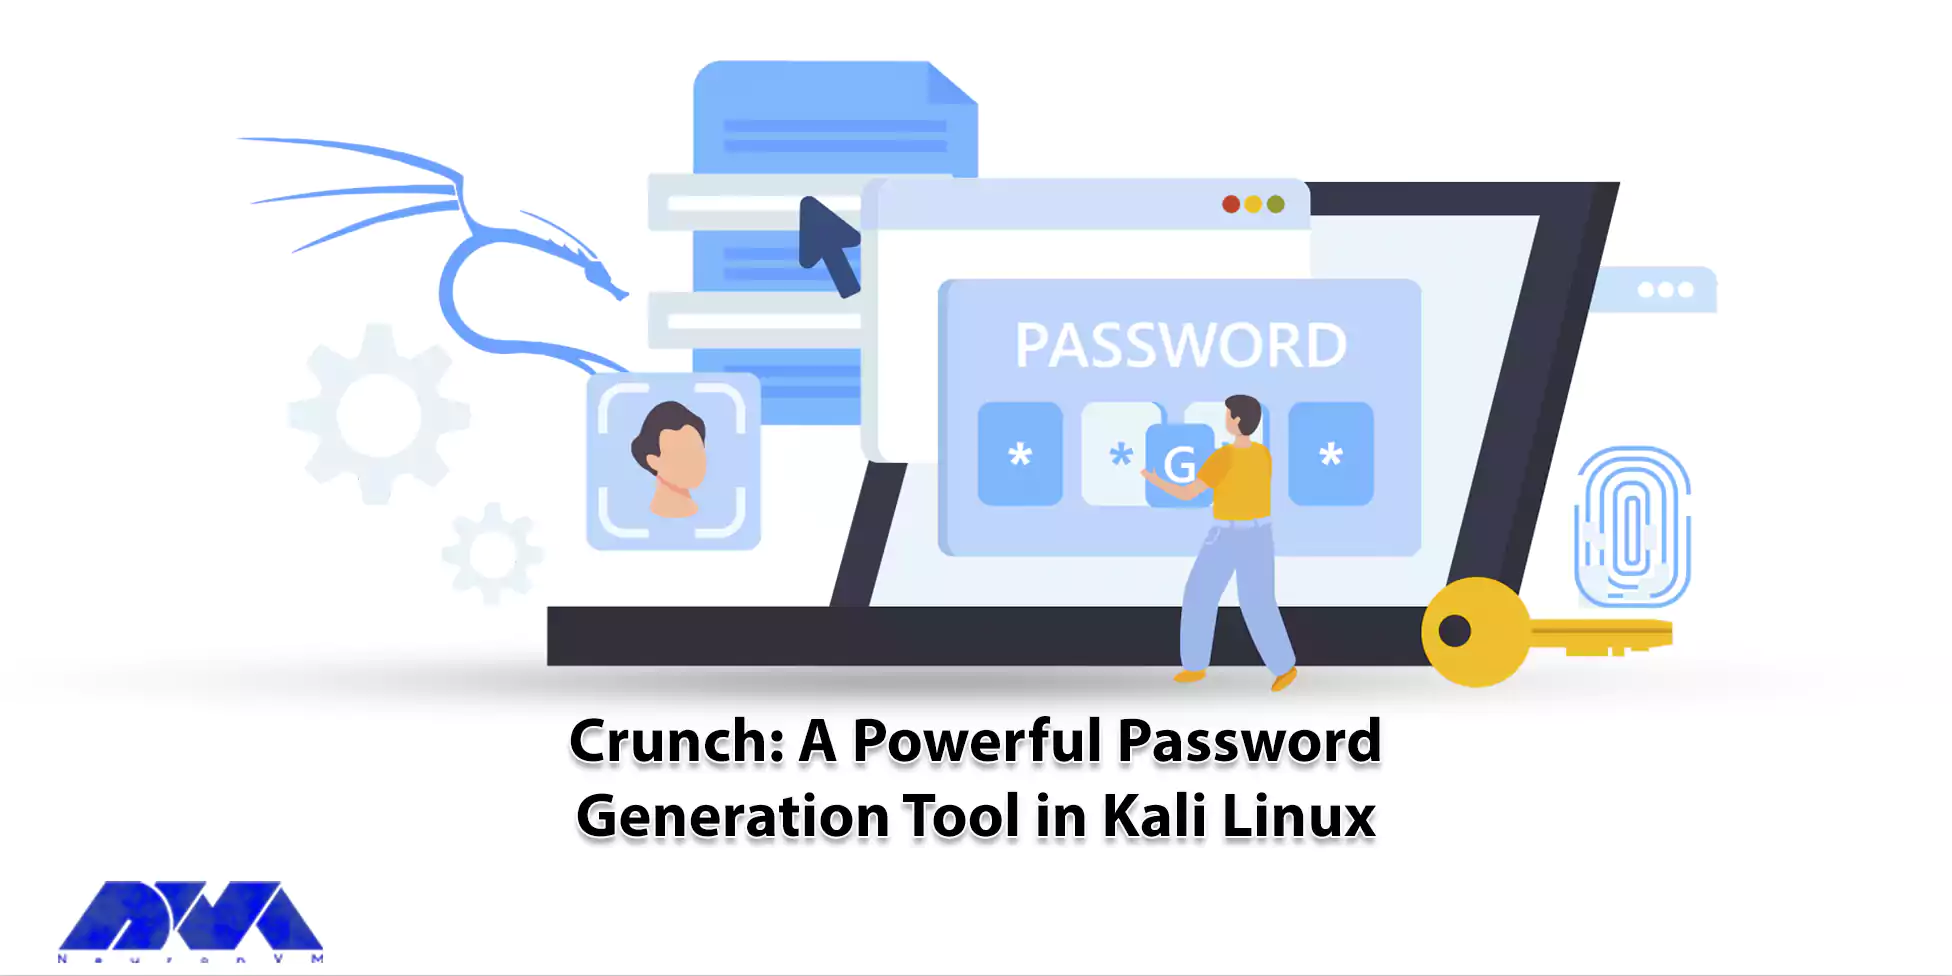 Crunch A Powerful Password Generation Tool in Kali Linux